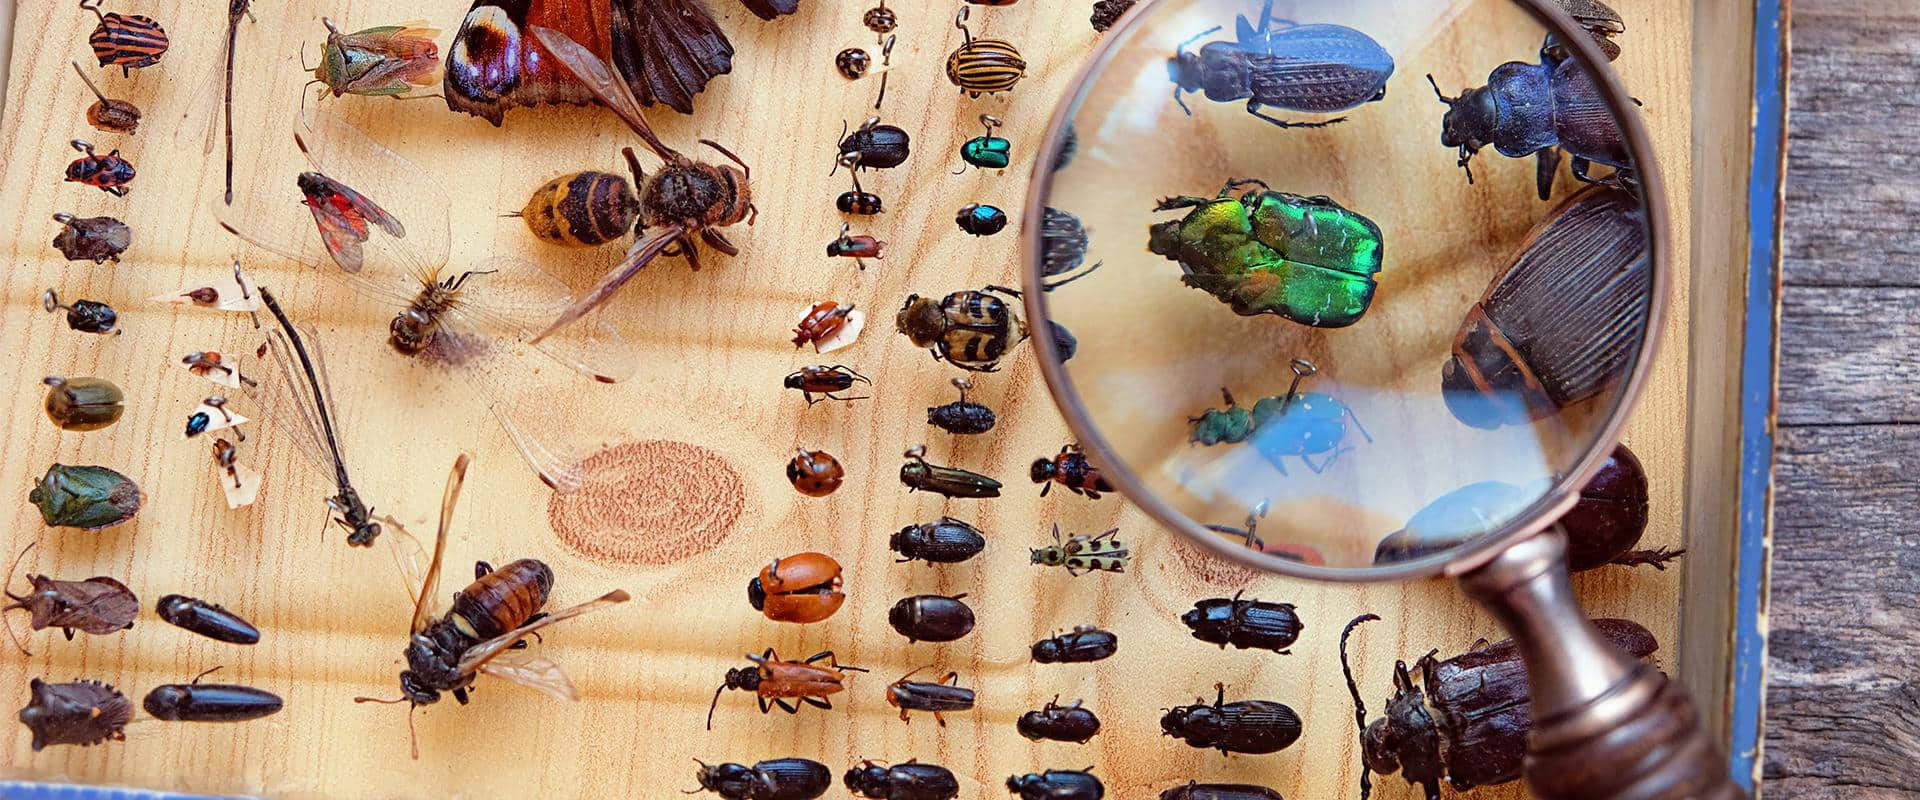 an entomology collection with a magnifying glass hovering over it